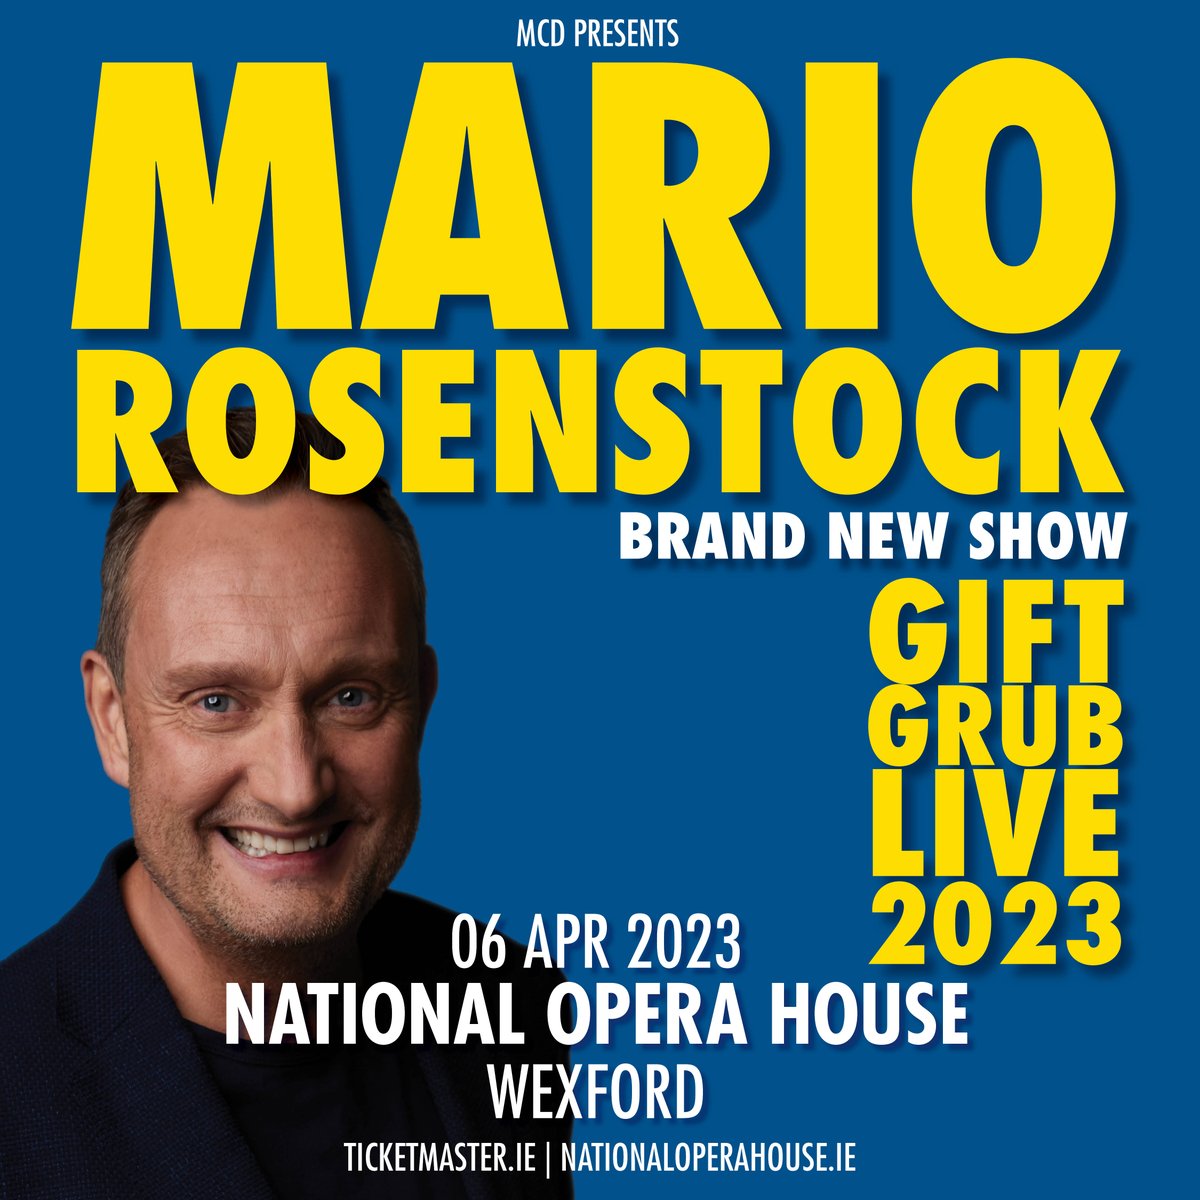 ⭐NOW ON SALE⭐ Mario Rosenstock Gift Grub Live 2023 is now on sale. Ireland’s most successful impressionist and satirist Mario Rosenstock celebrates Gift Grub with a brand spanking new stage show. Thursday, 6 April 2023 Tickets: €39 👉 bit.ly/2KCB2nu